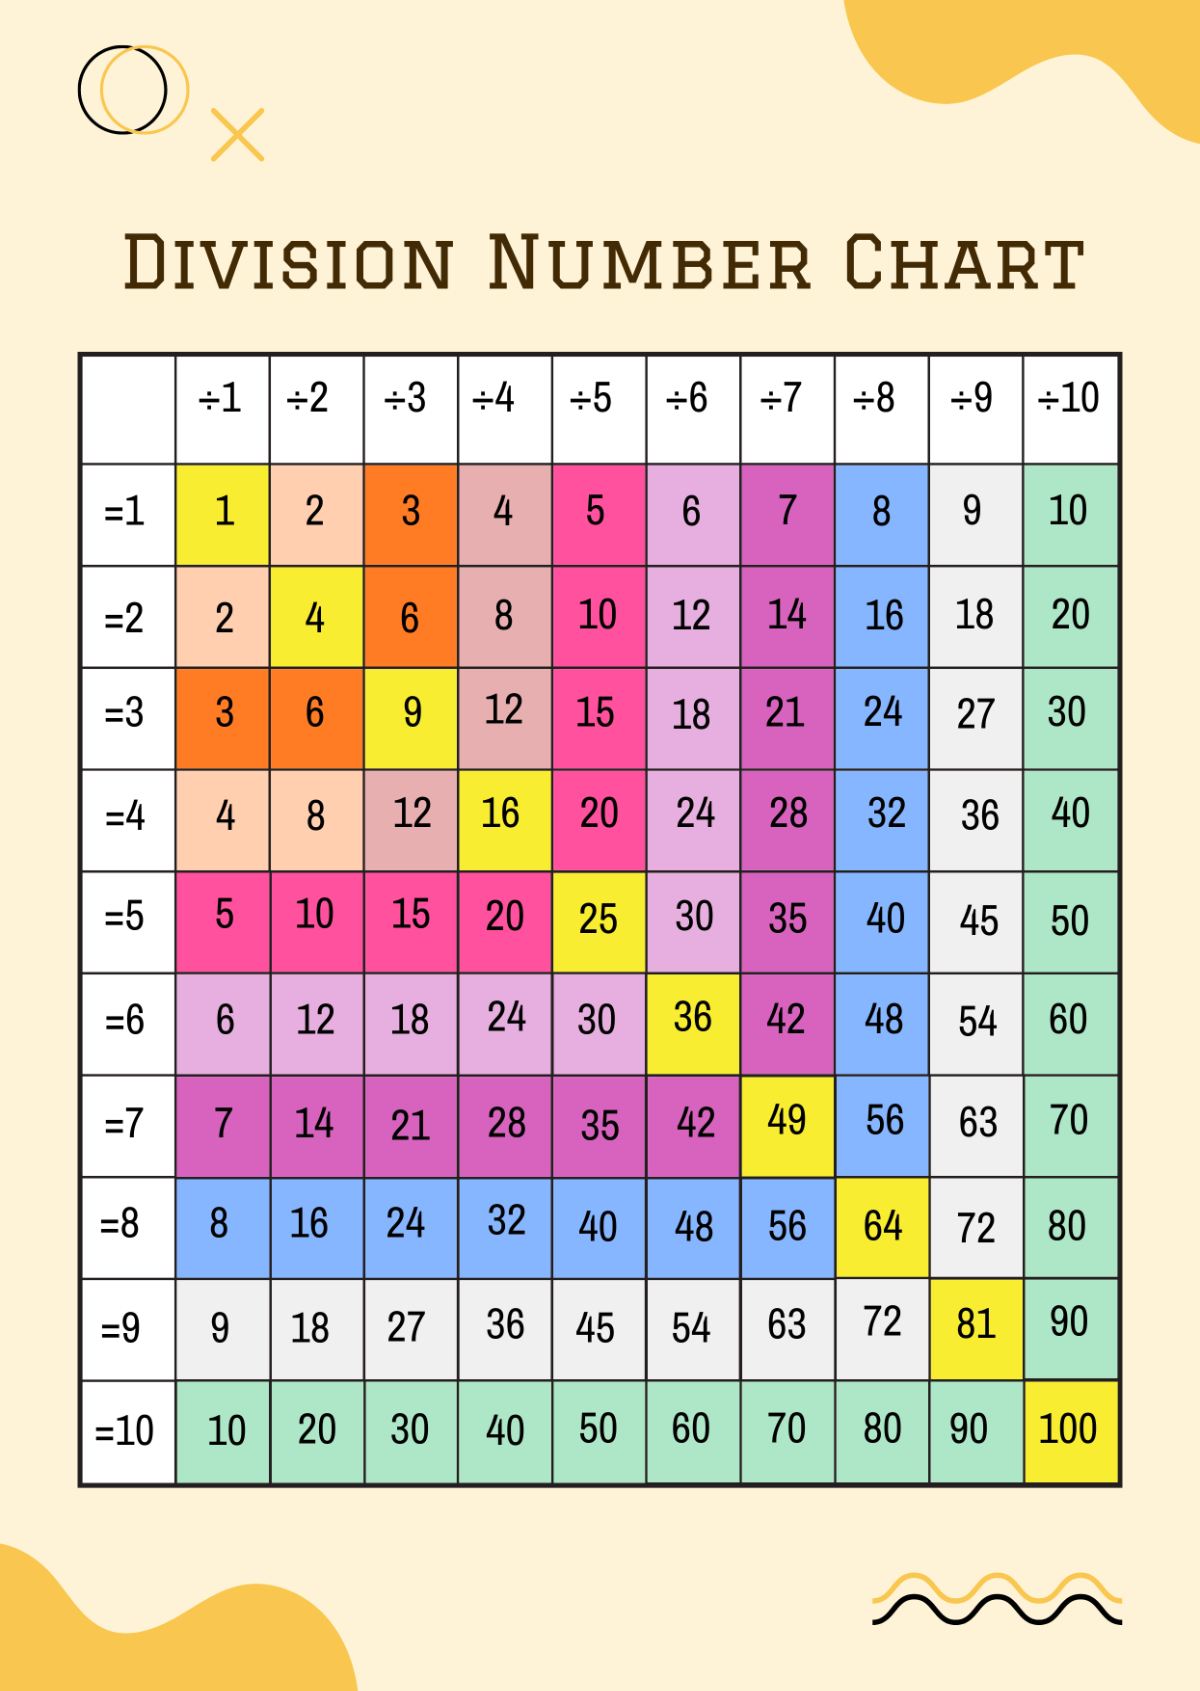 Division Number Chart